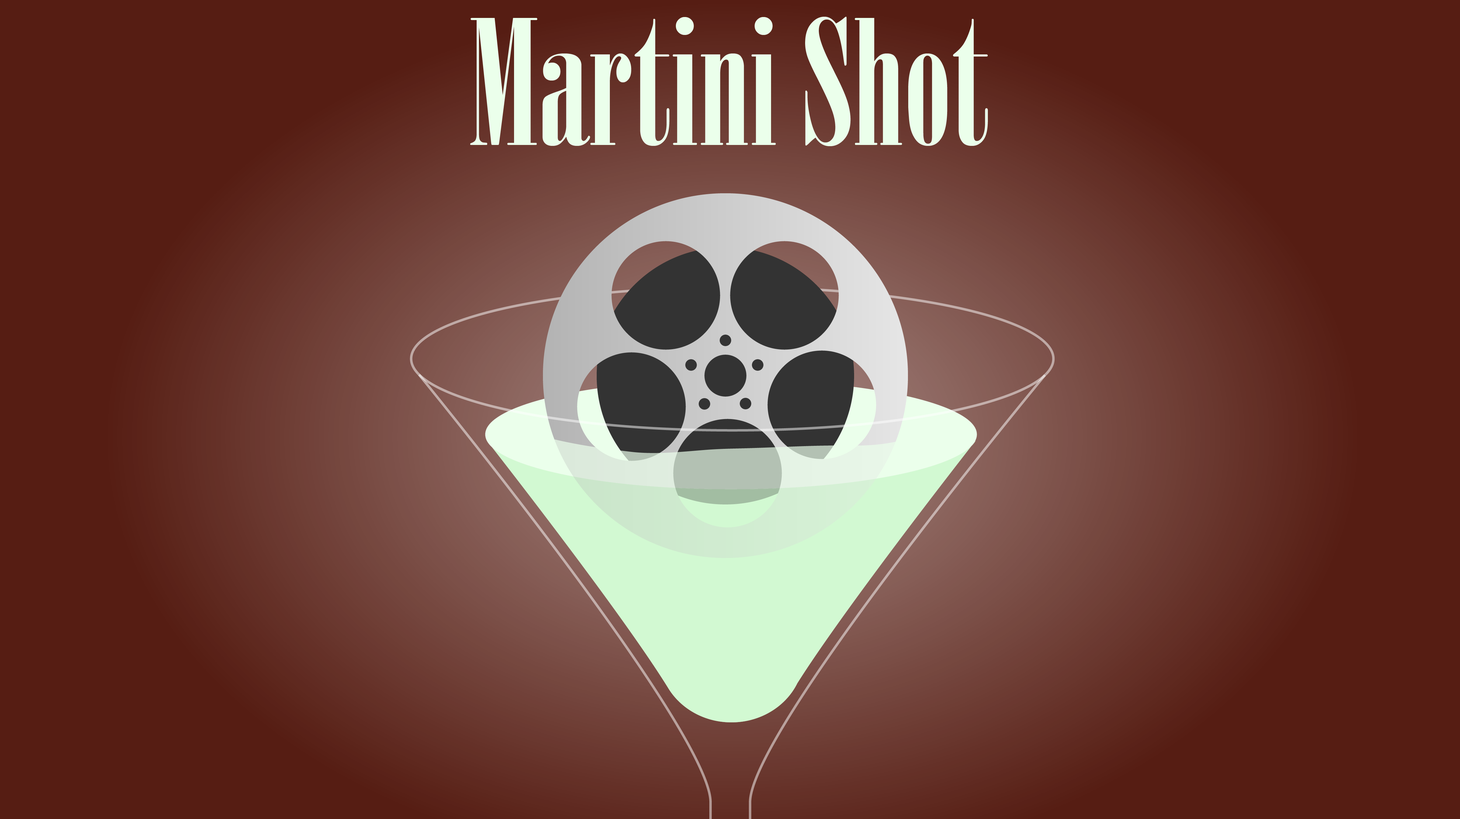 This is Rob Long, and on today’s Martini Shot I talk about the difference between TV shows set in the past, and TV shows from the past. One is nostalgia, the other is desperation.